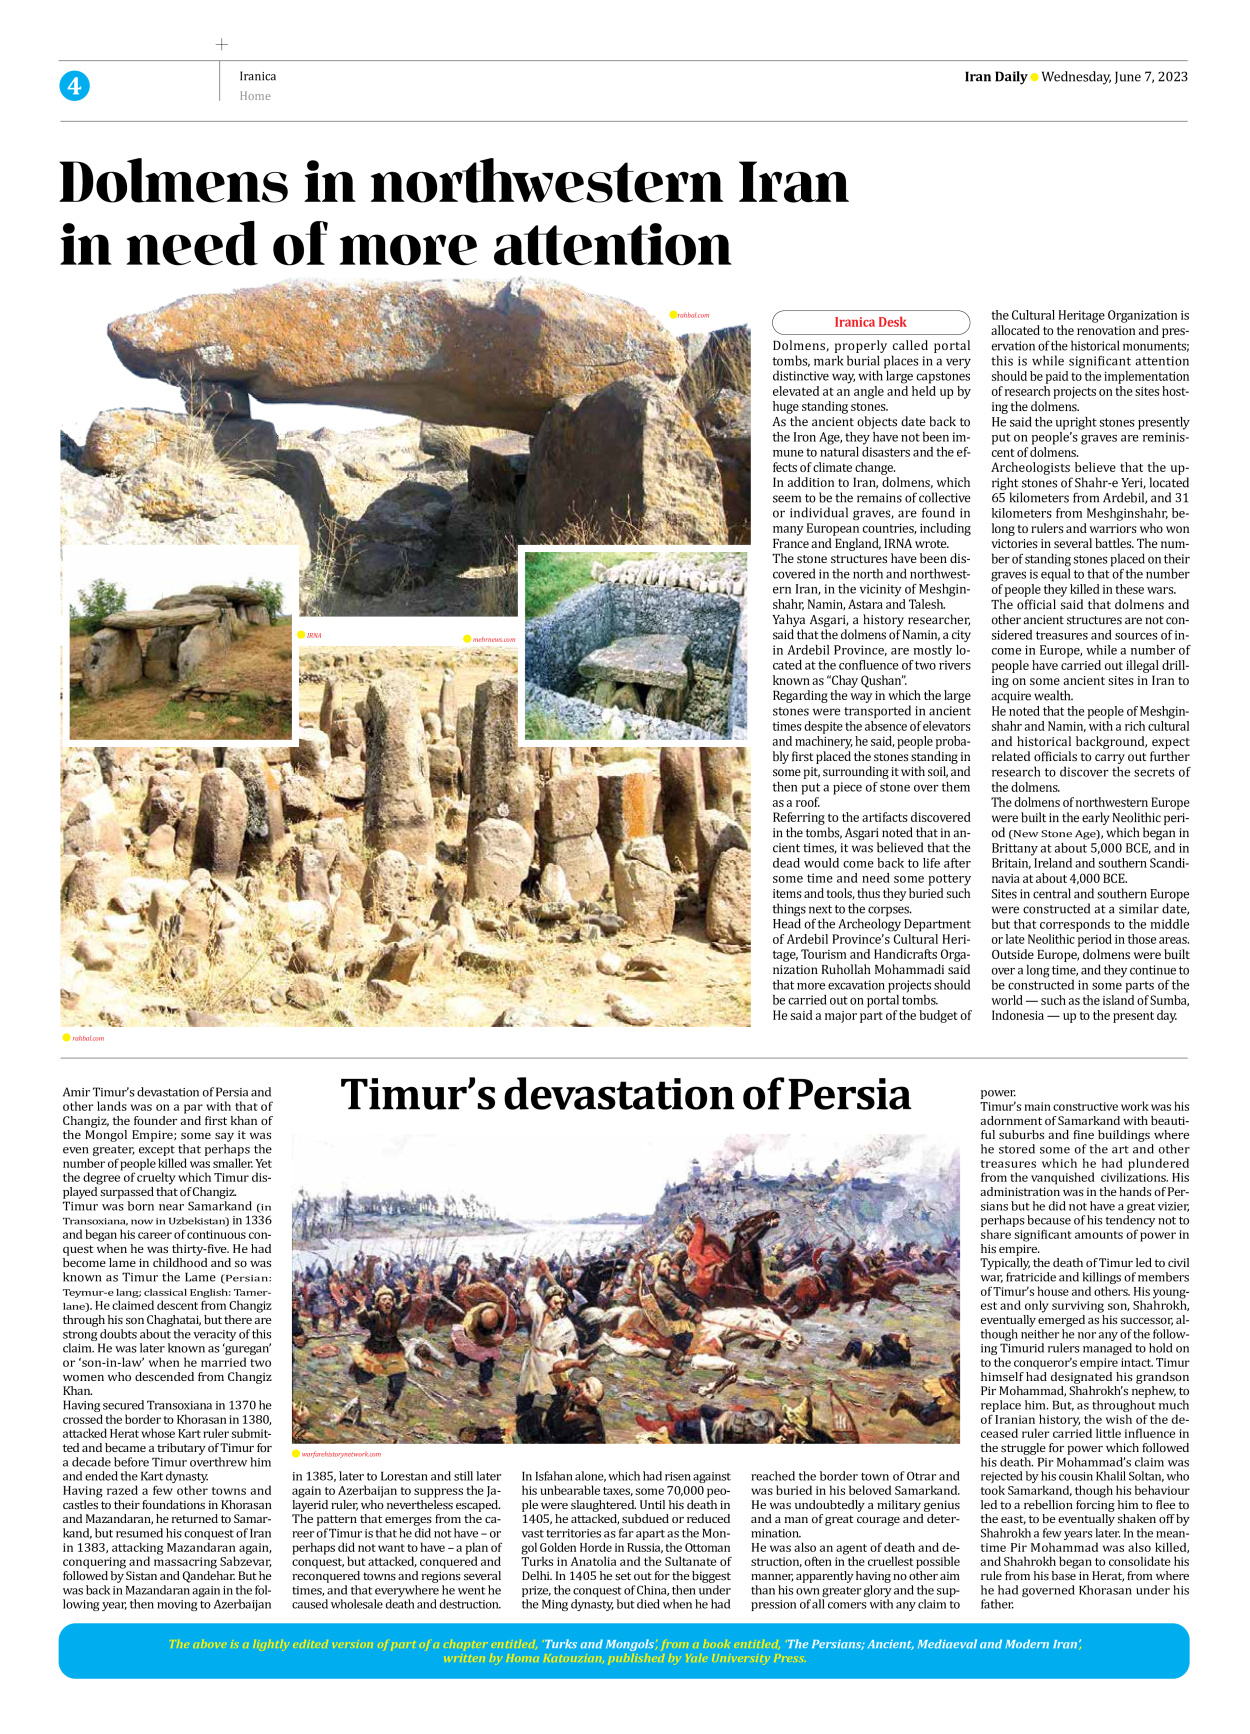 Iran Daily - Number Seven Thousand Three Hundred and Eight - 07 June 2023 - Page 4